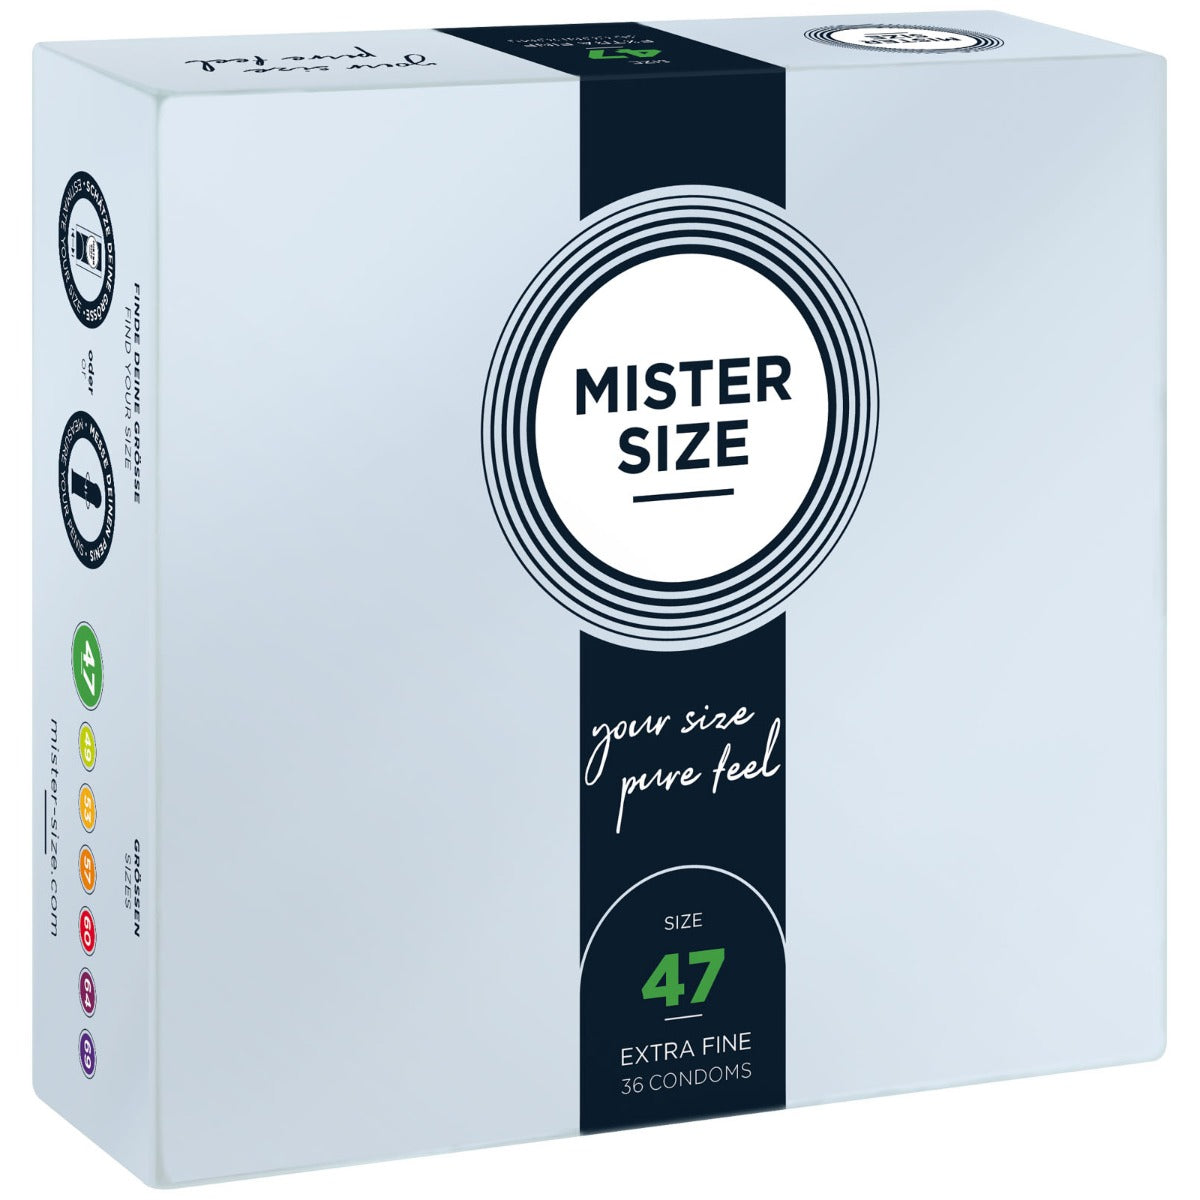 MISTER SIZE | Pure feel Condoms - size 47 mm (36 pack)